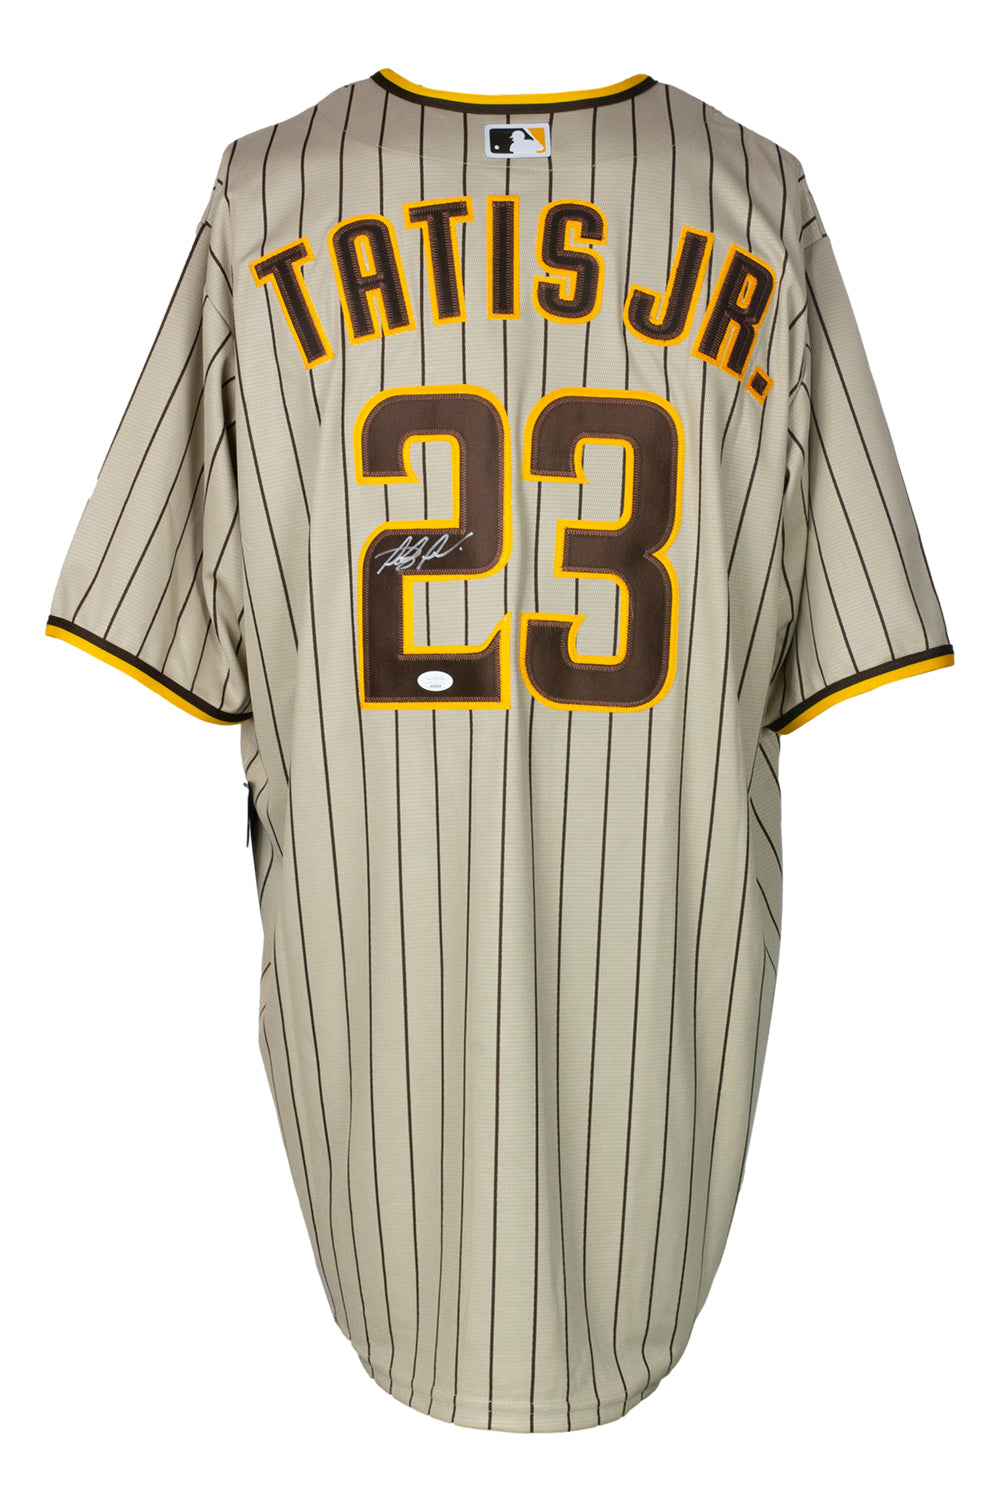 Fernando Tatis Jr. and San Diego Padres Jersey and Sports